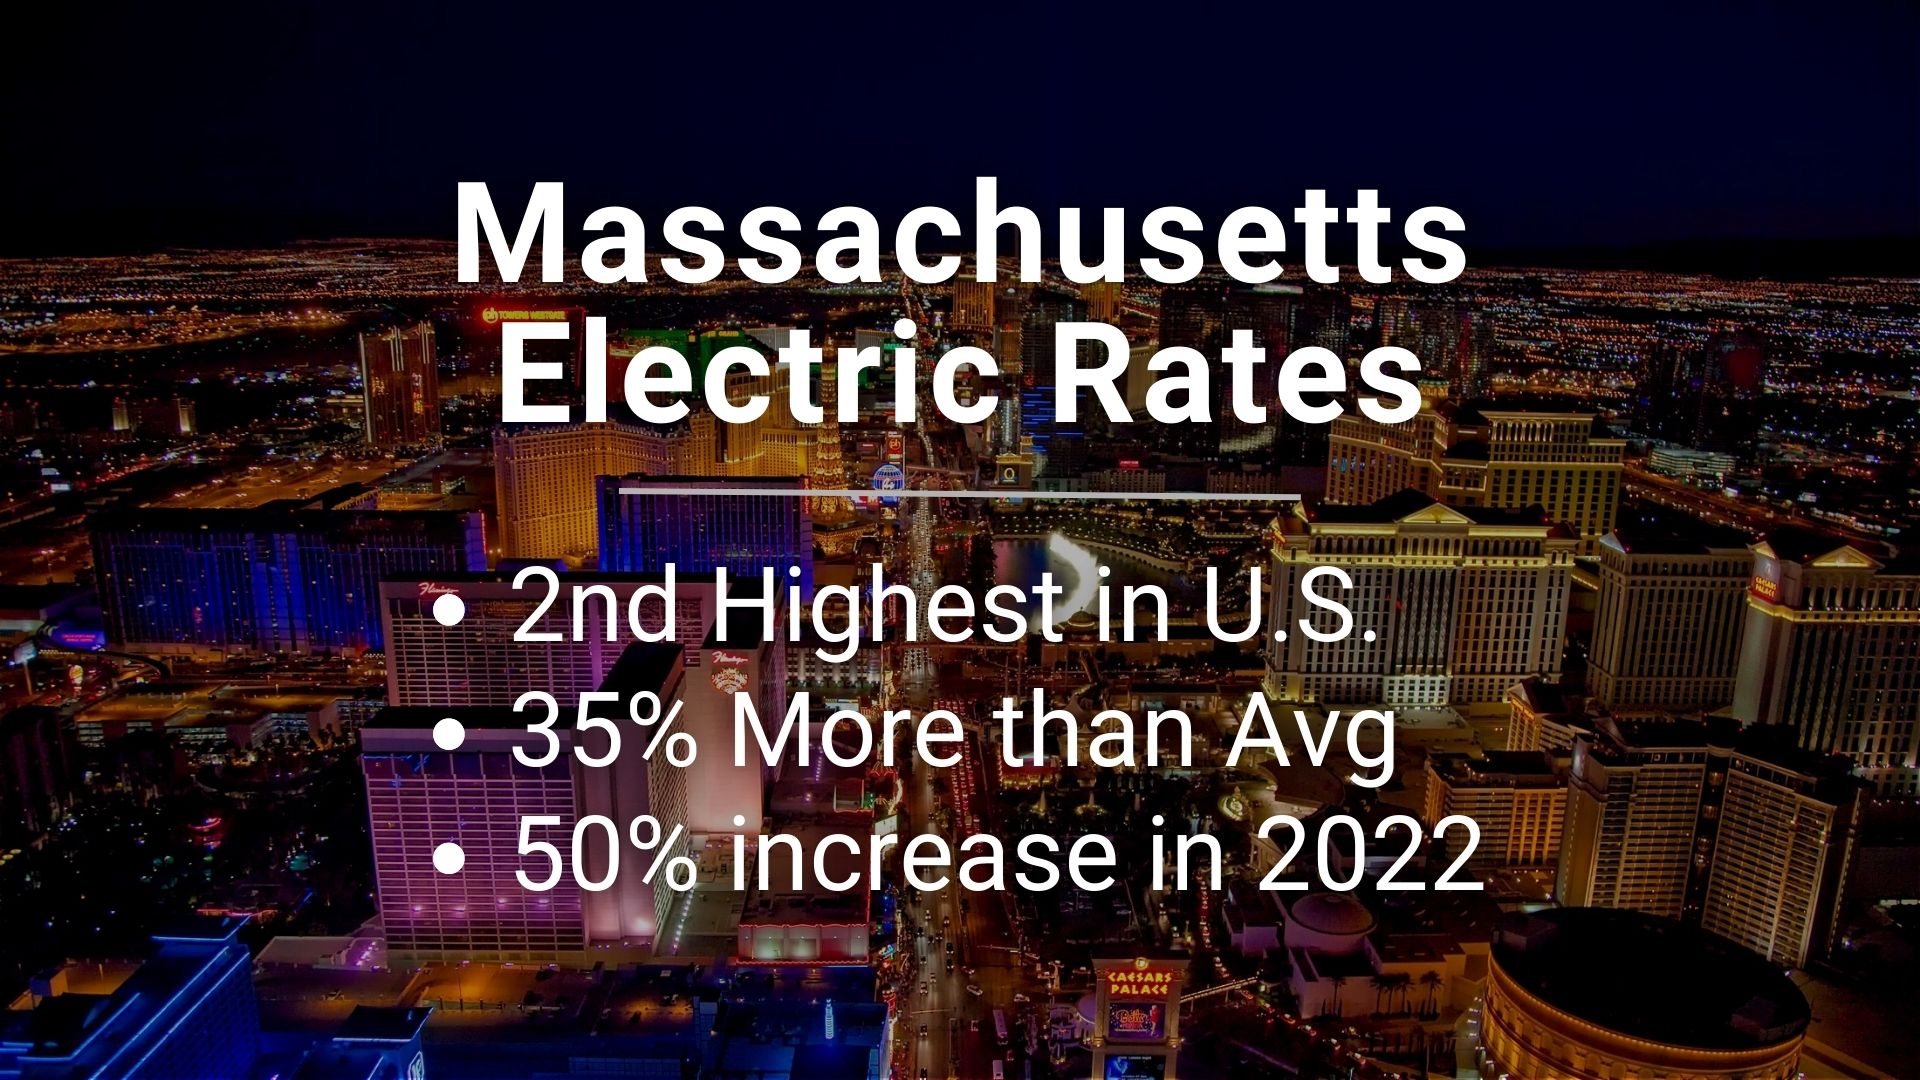 Skyline of Boston, Massachusetts with text that says "Massachusetts Electric Rates - 2nd Highest in US, 35% More than Avg, 50% Increase in 2022